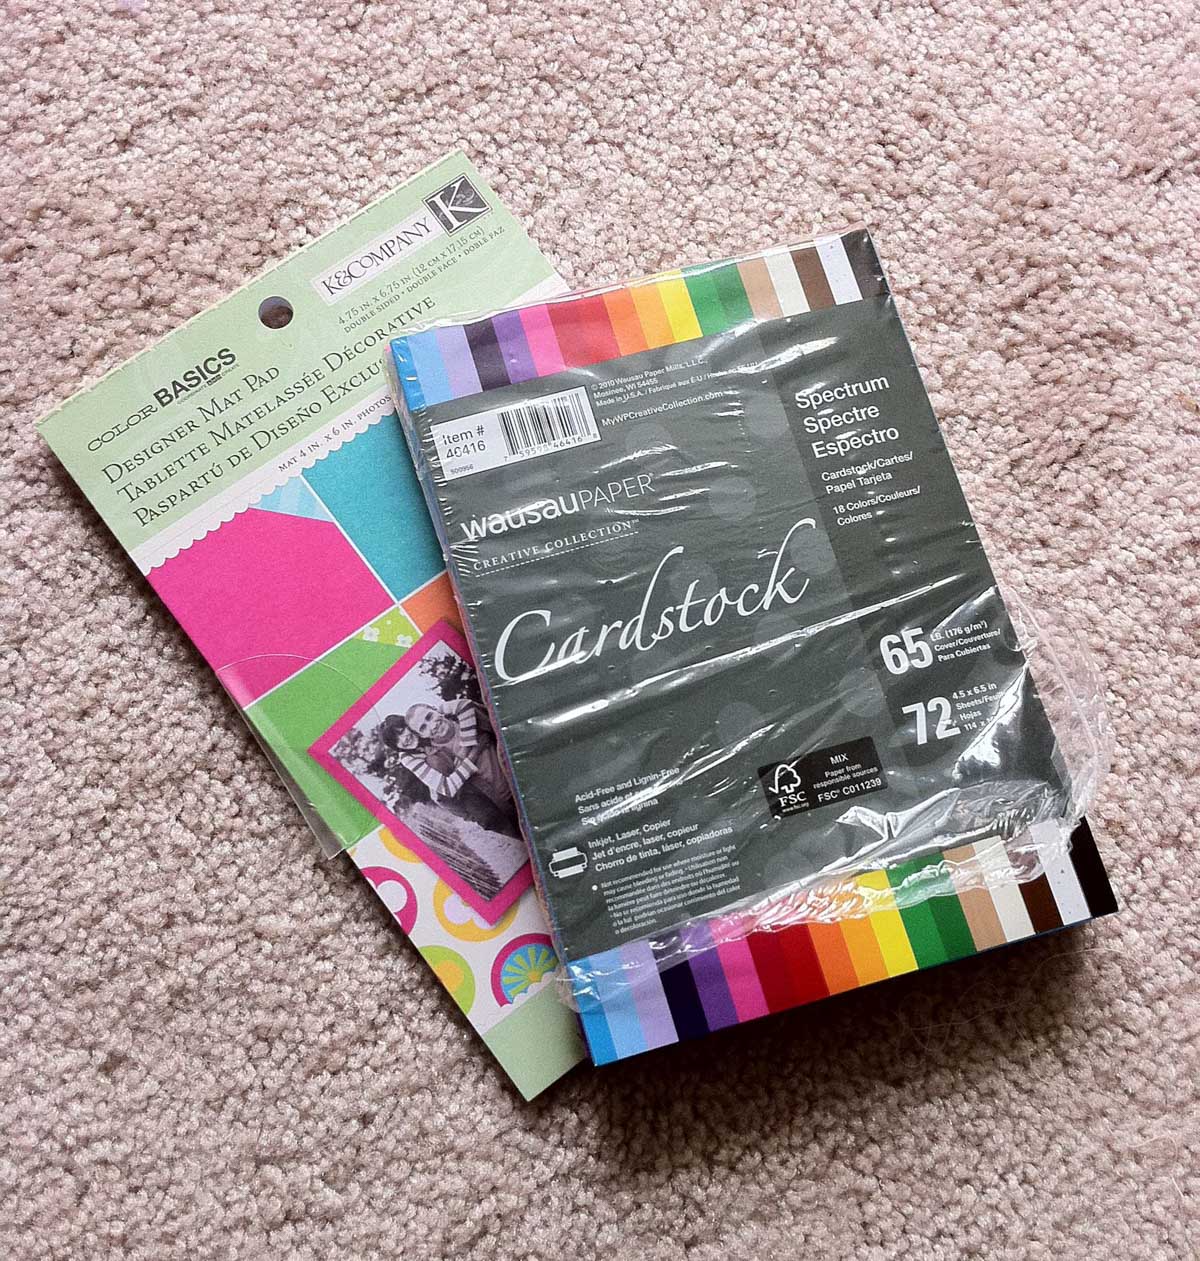 A colorful package of cardstock and letter stickers.